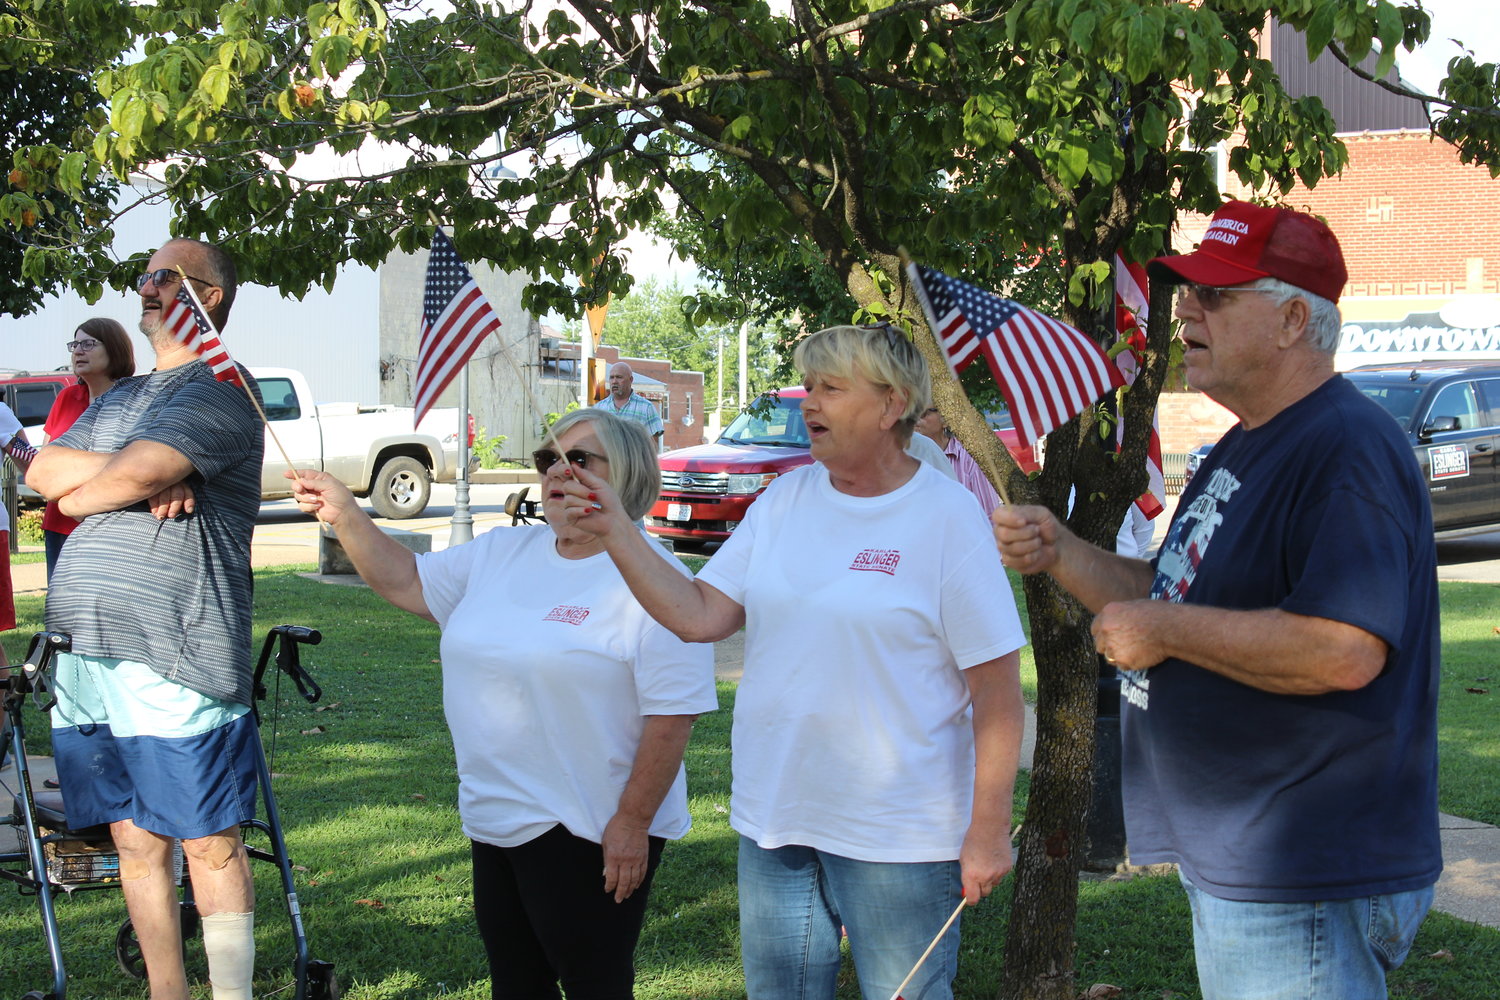 Several in attendance brought American flags to wave during the event.